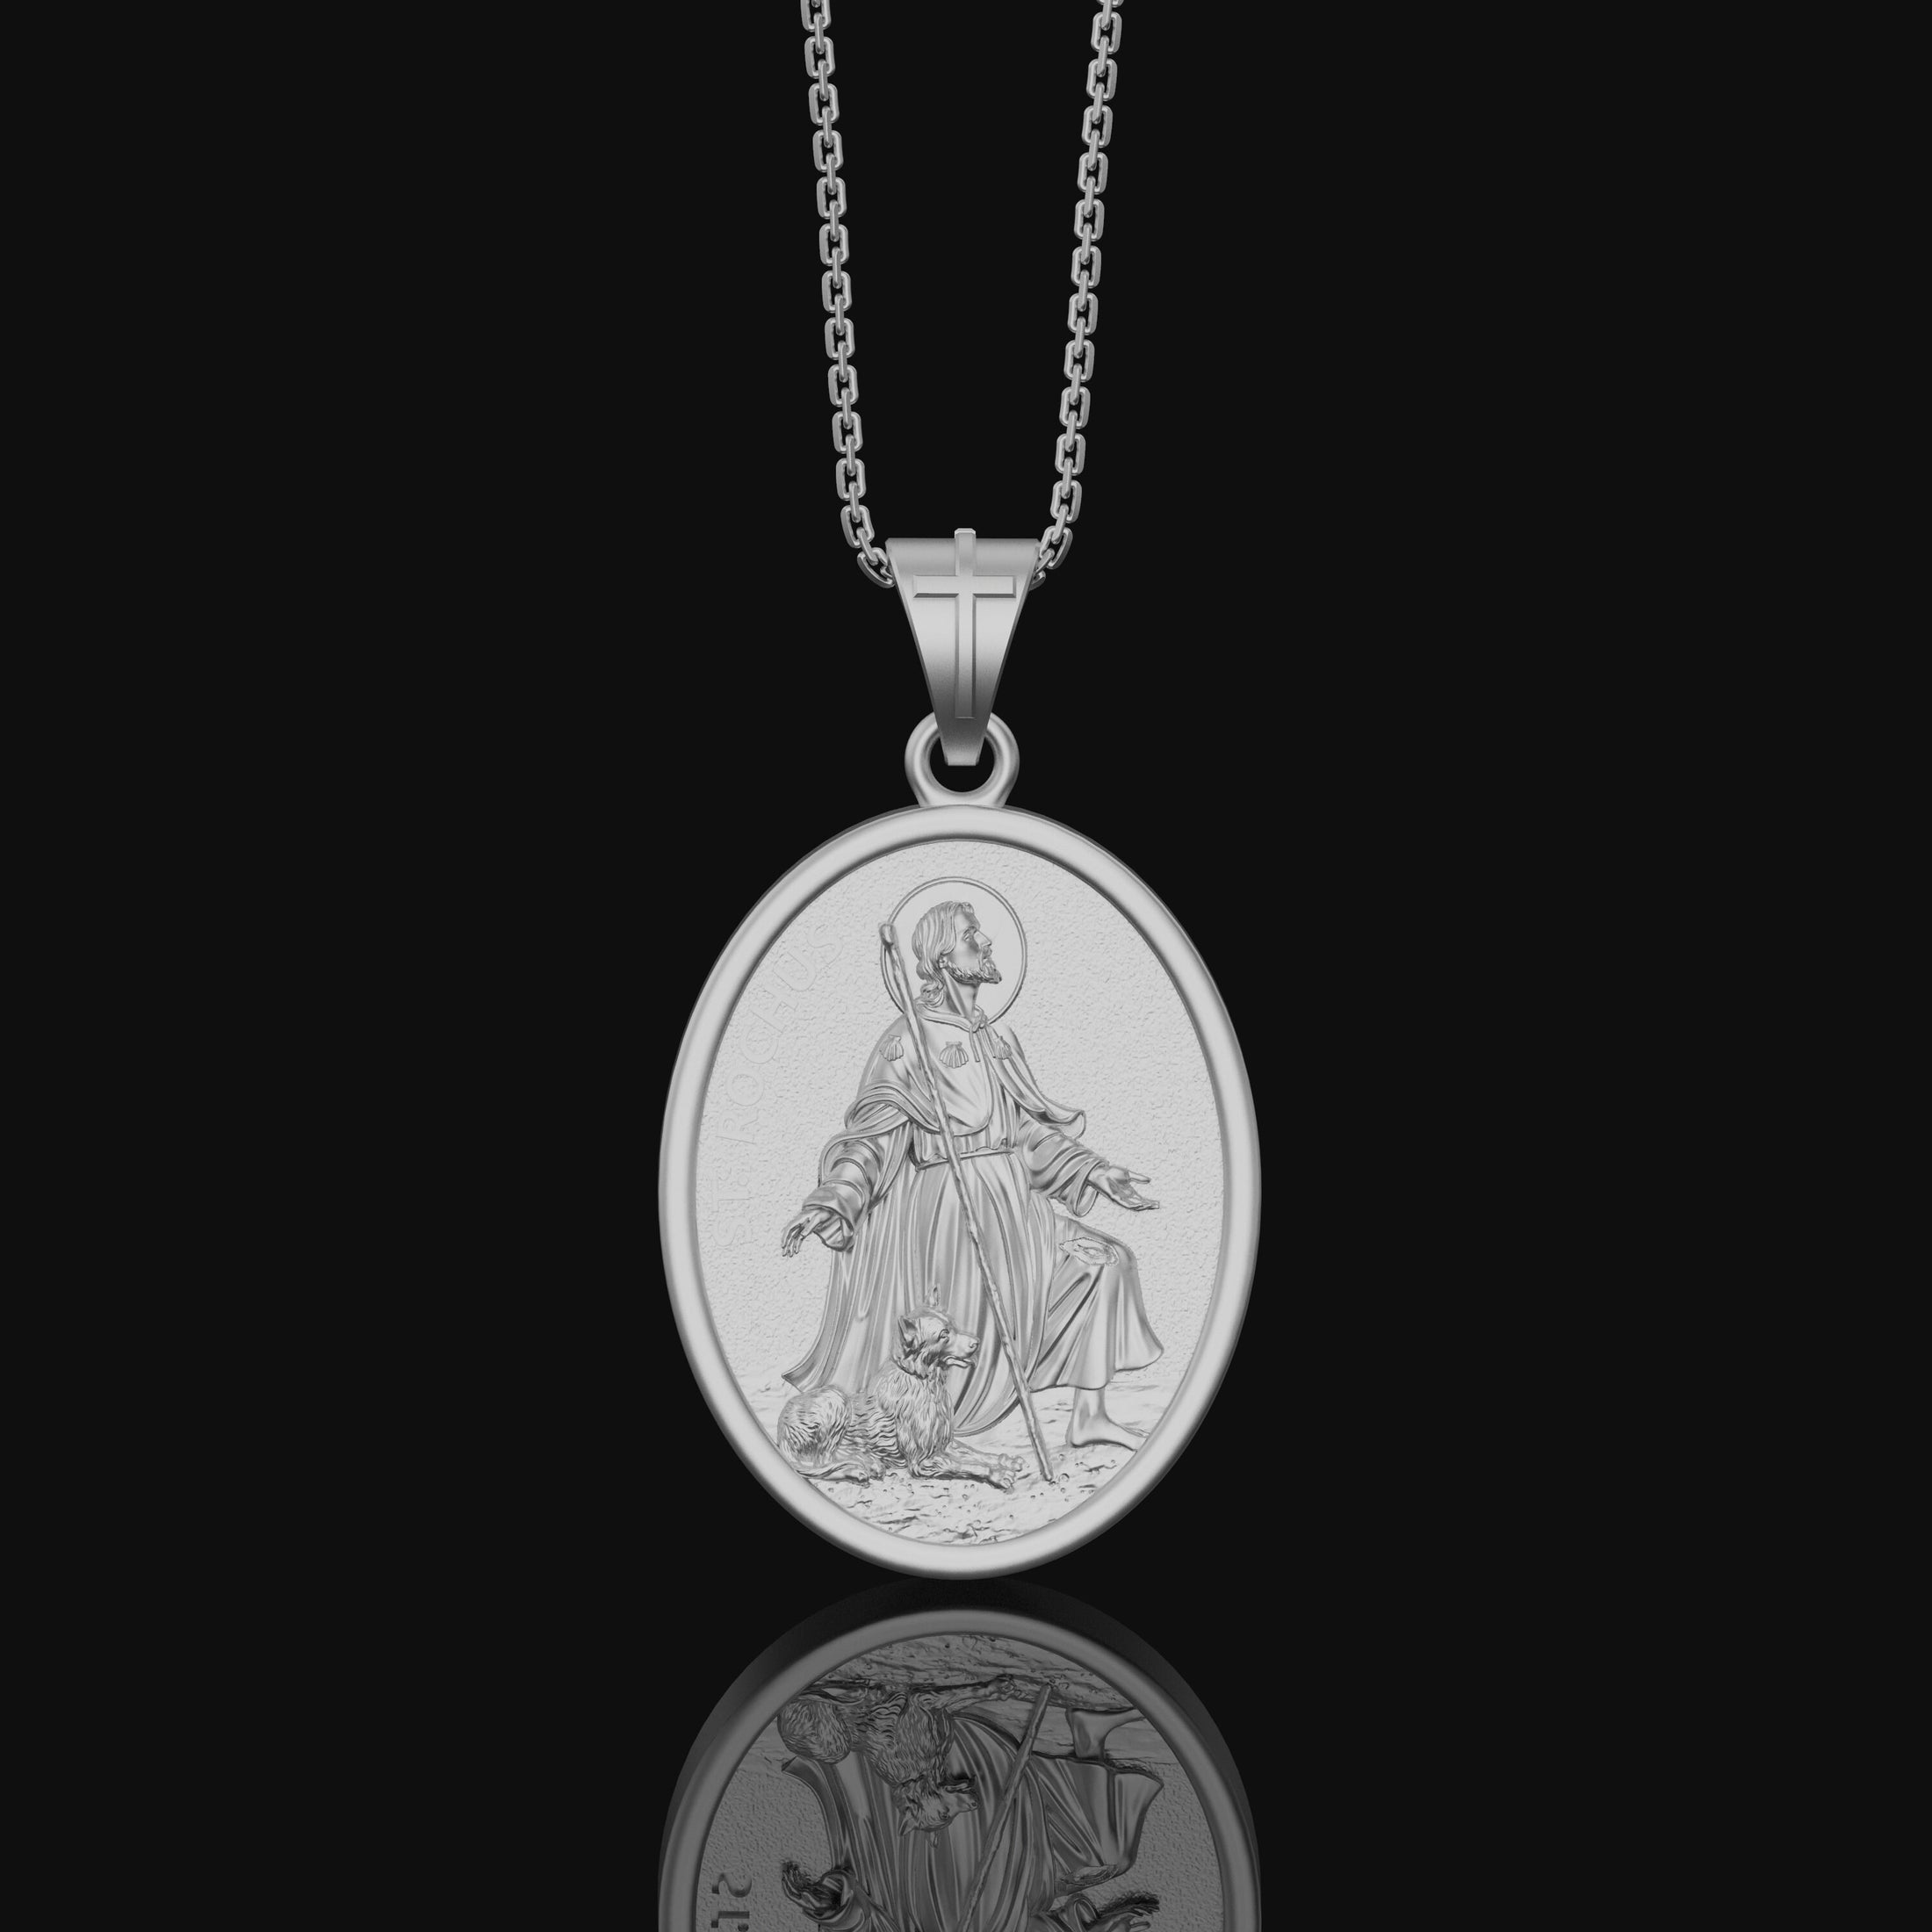 Saint Rochus Necklace, Dog Protection, Christmas Gift, Personalized Gift, Silver Medallion, Christian Jewelry, Vintage Religious Necklace Polished Finish